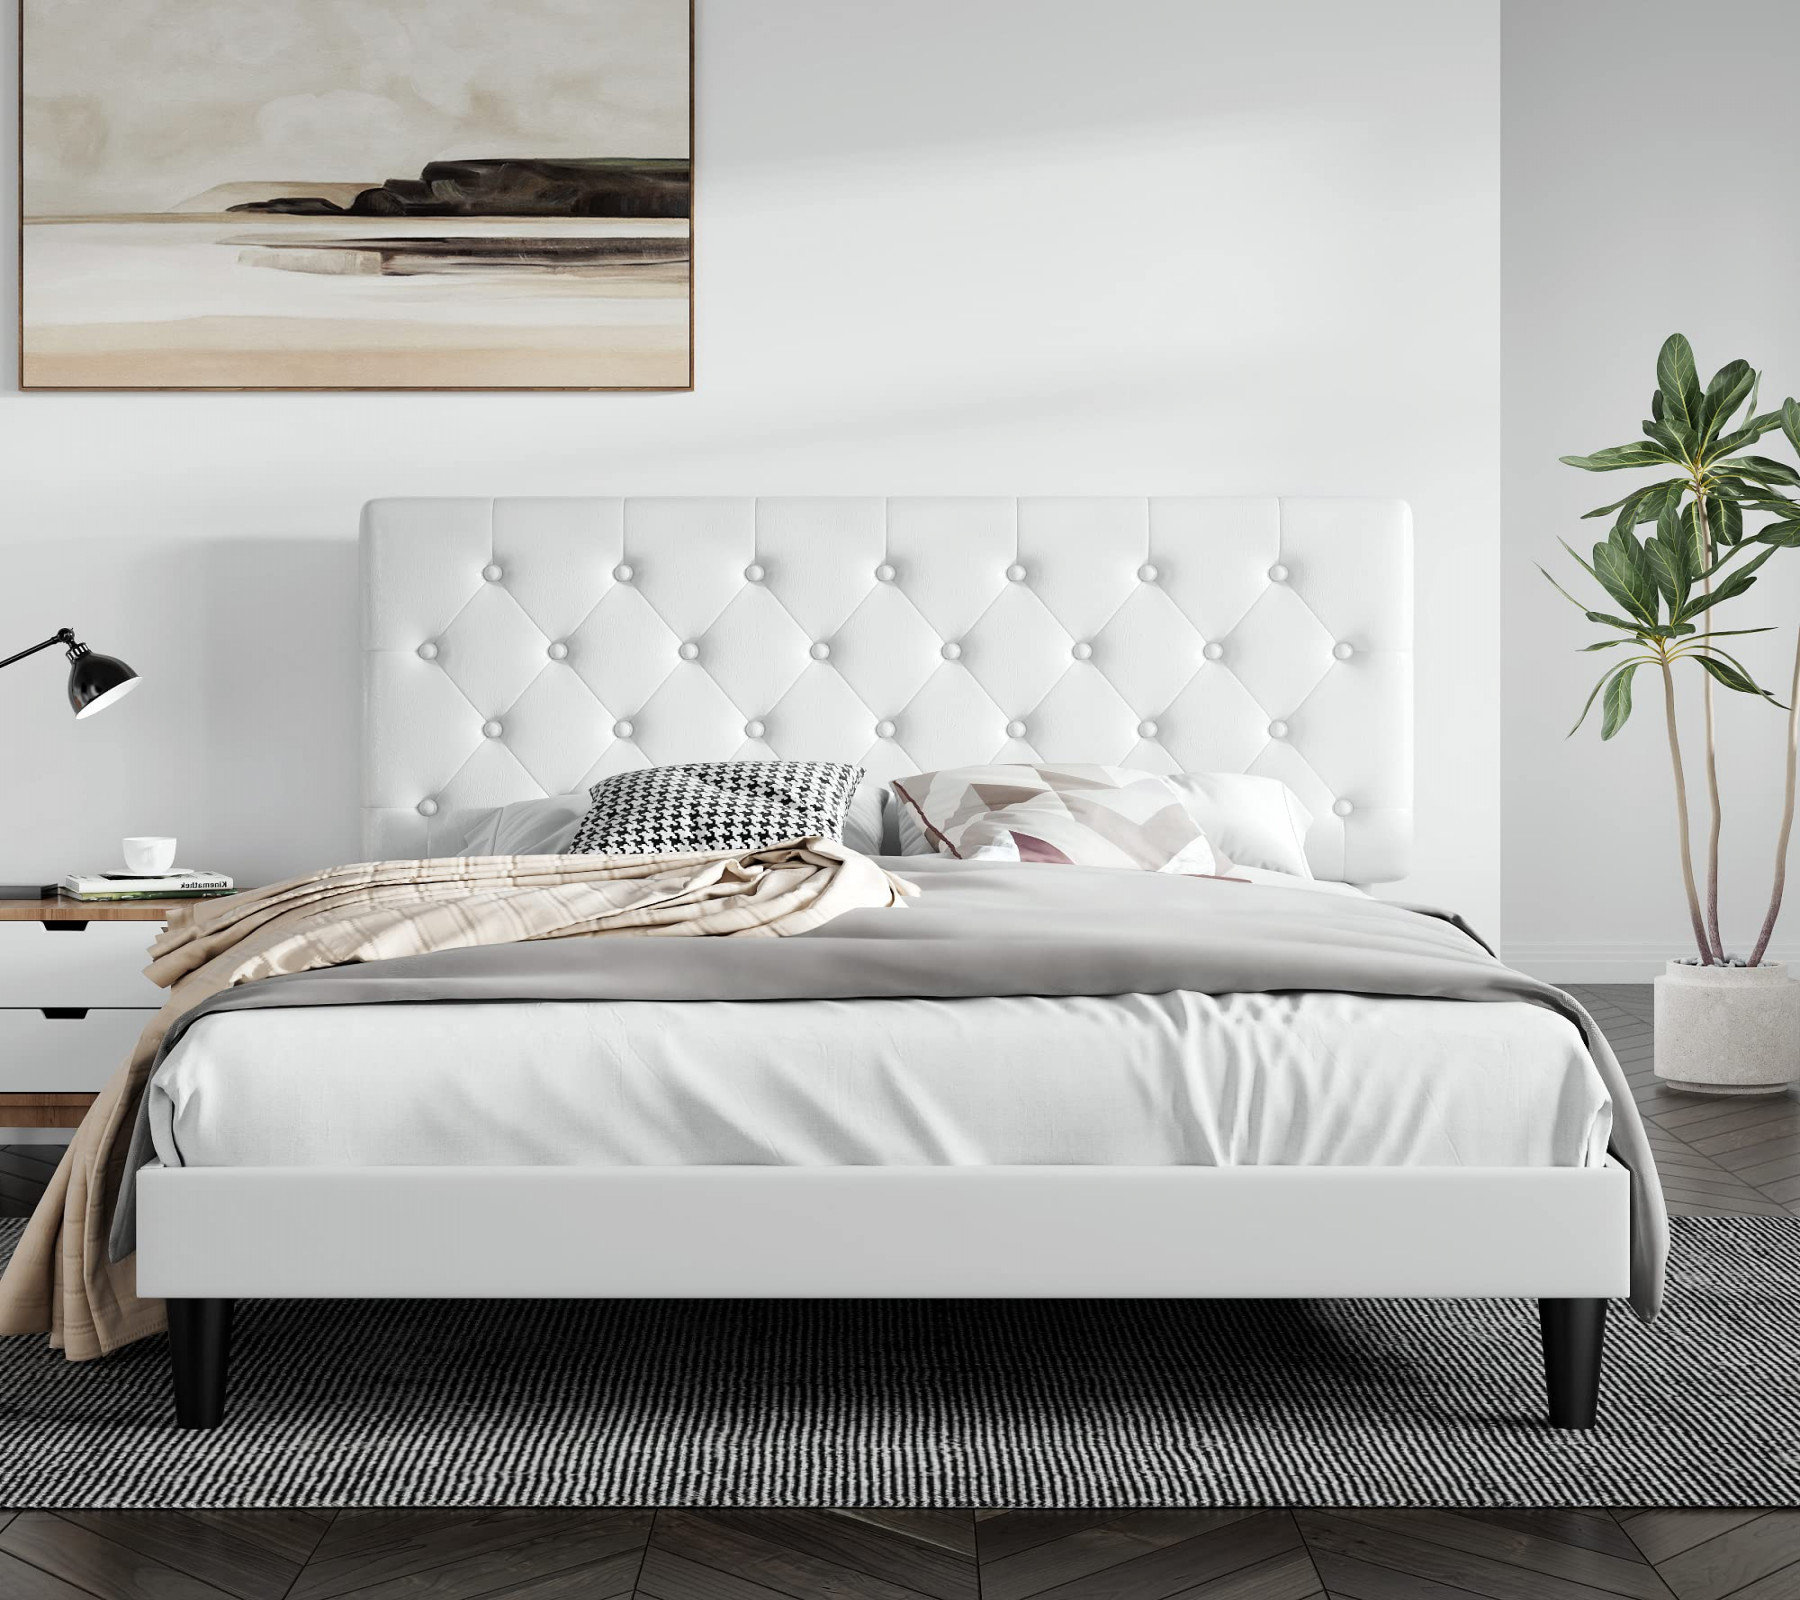 SHA CERLIN Full Size Bed Frame with Button Tufted Headboard, Faux Leather  Upholstered Mattress Foundation, Platform Bed Frame, Wooden Slat Support,  No